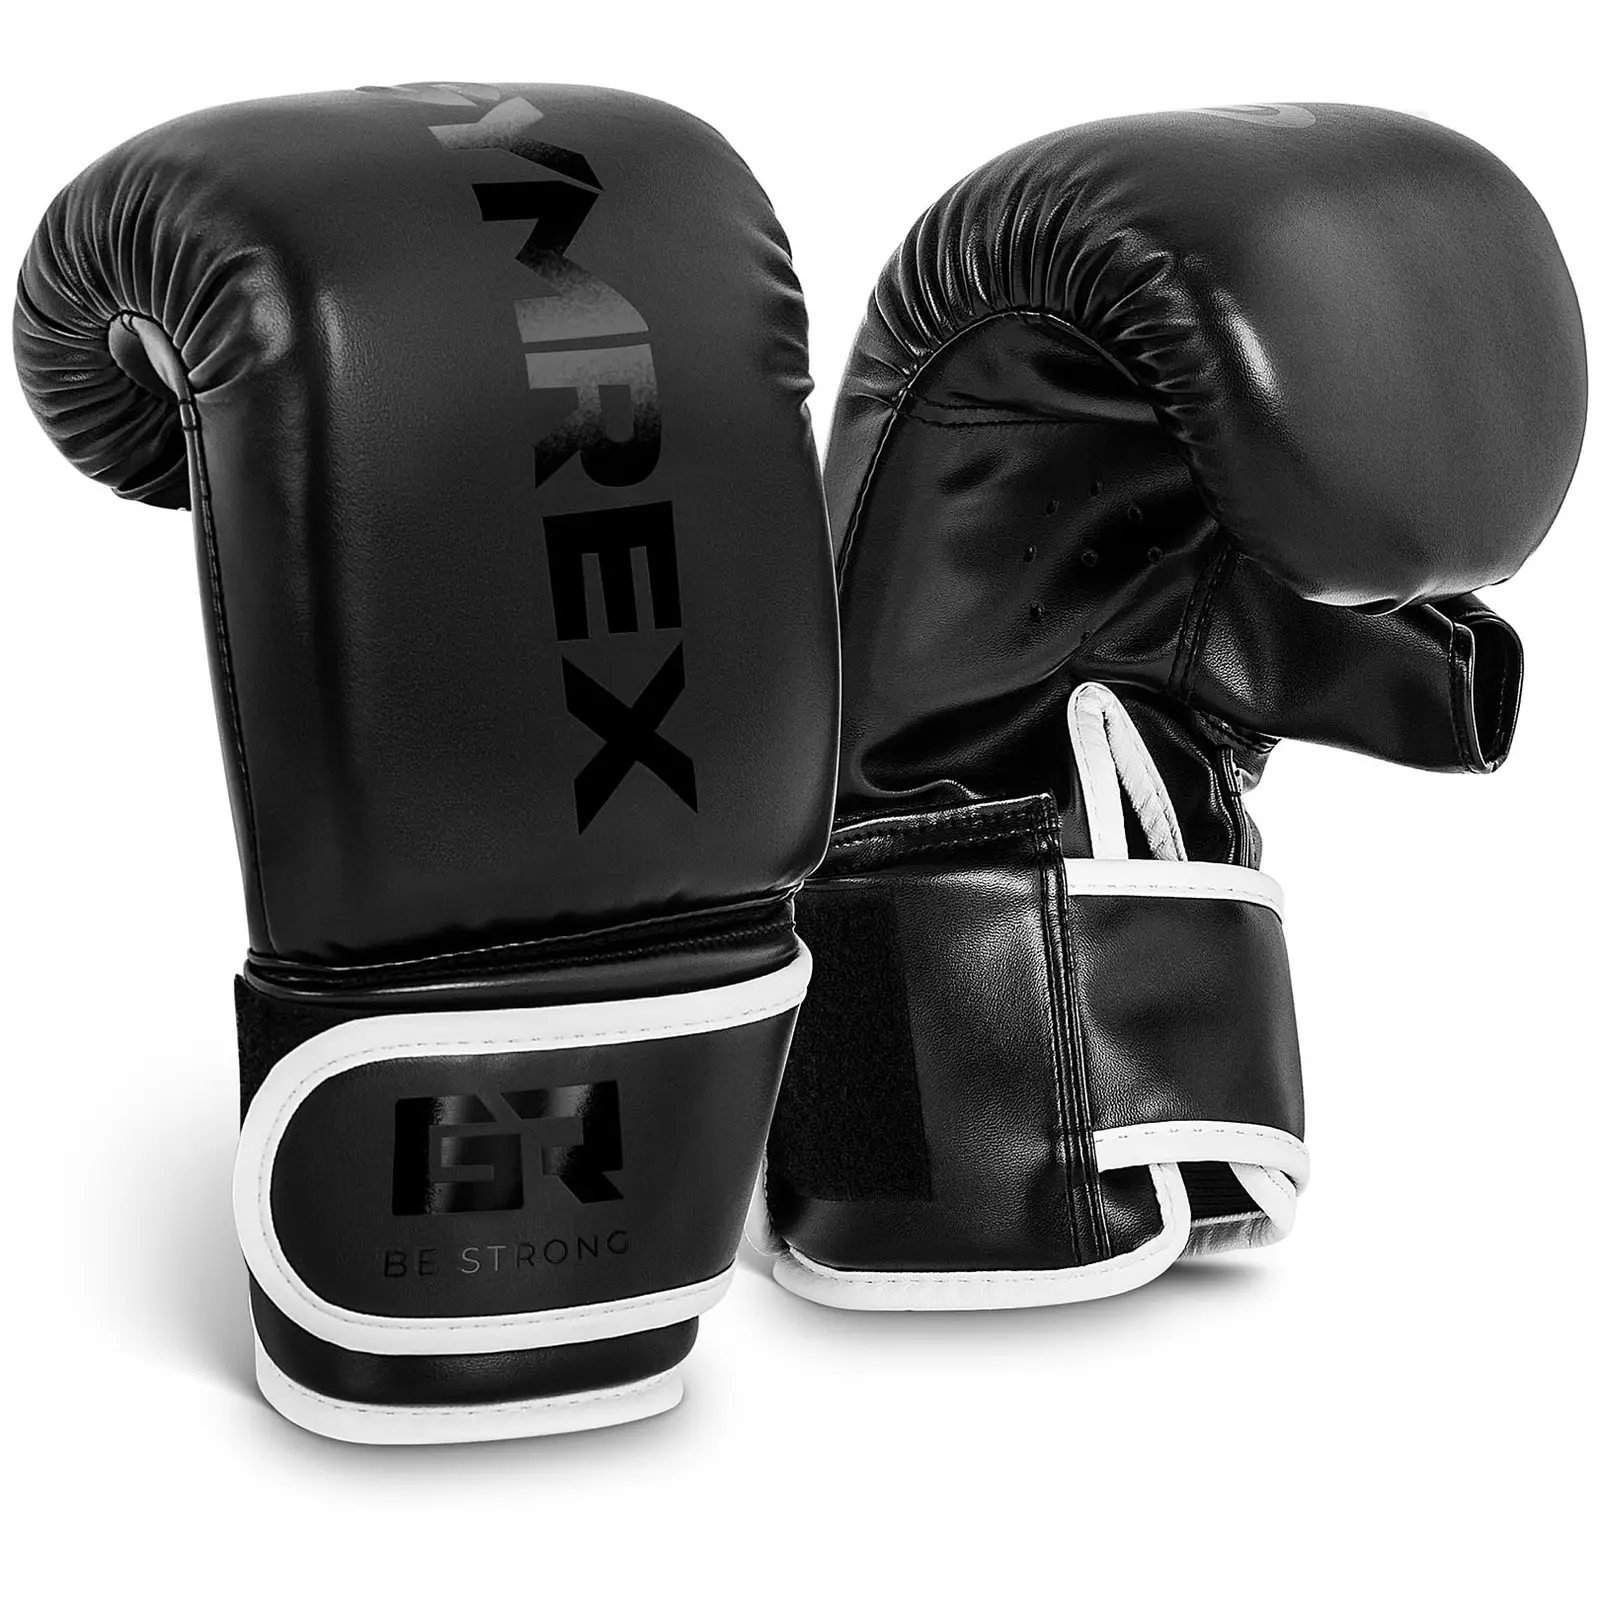 What is the difference between 8 oz Gloves and 10 oz Gloves? – ShortBoxing